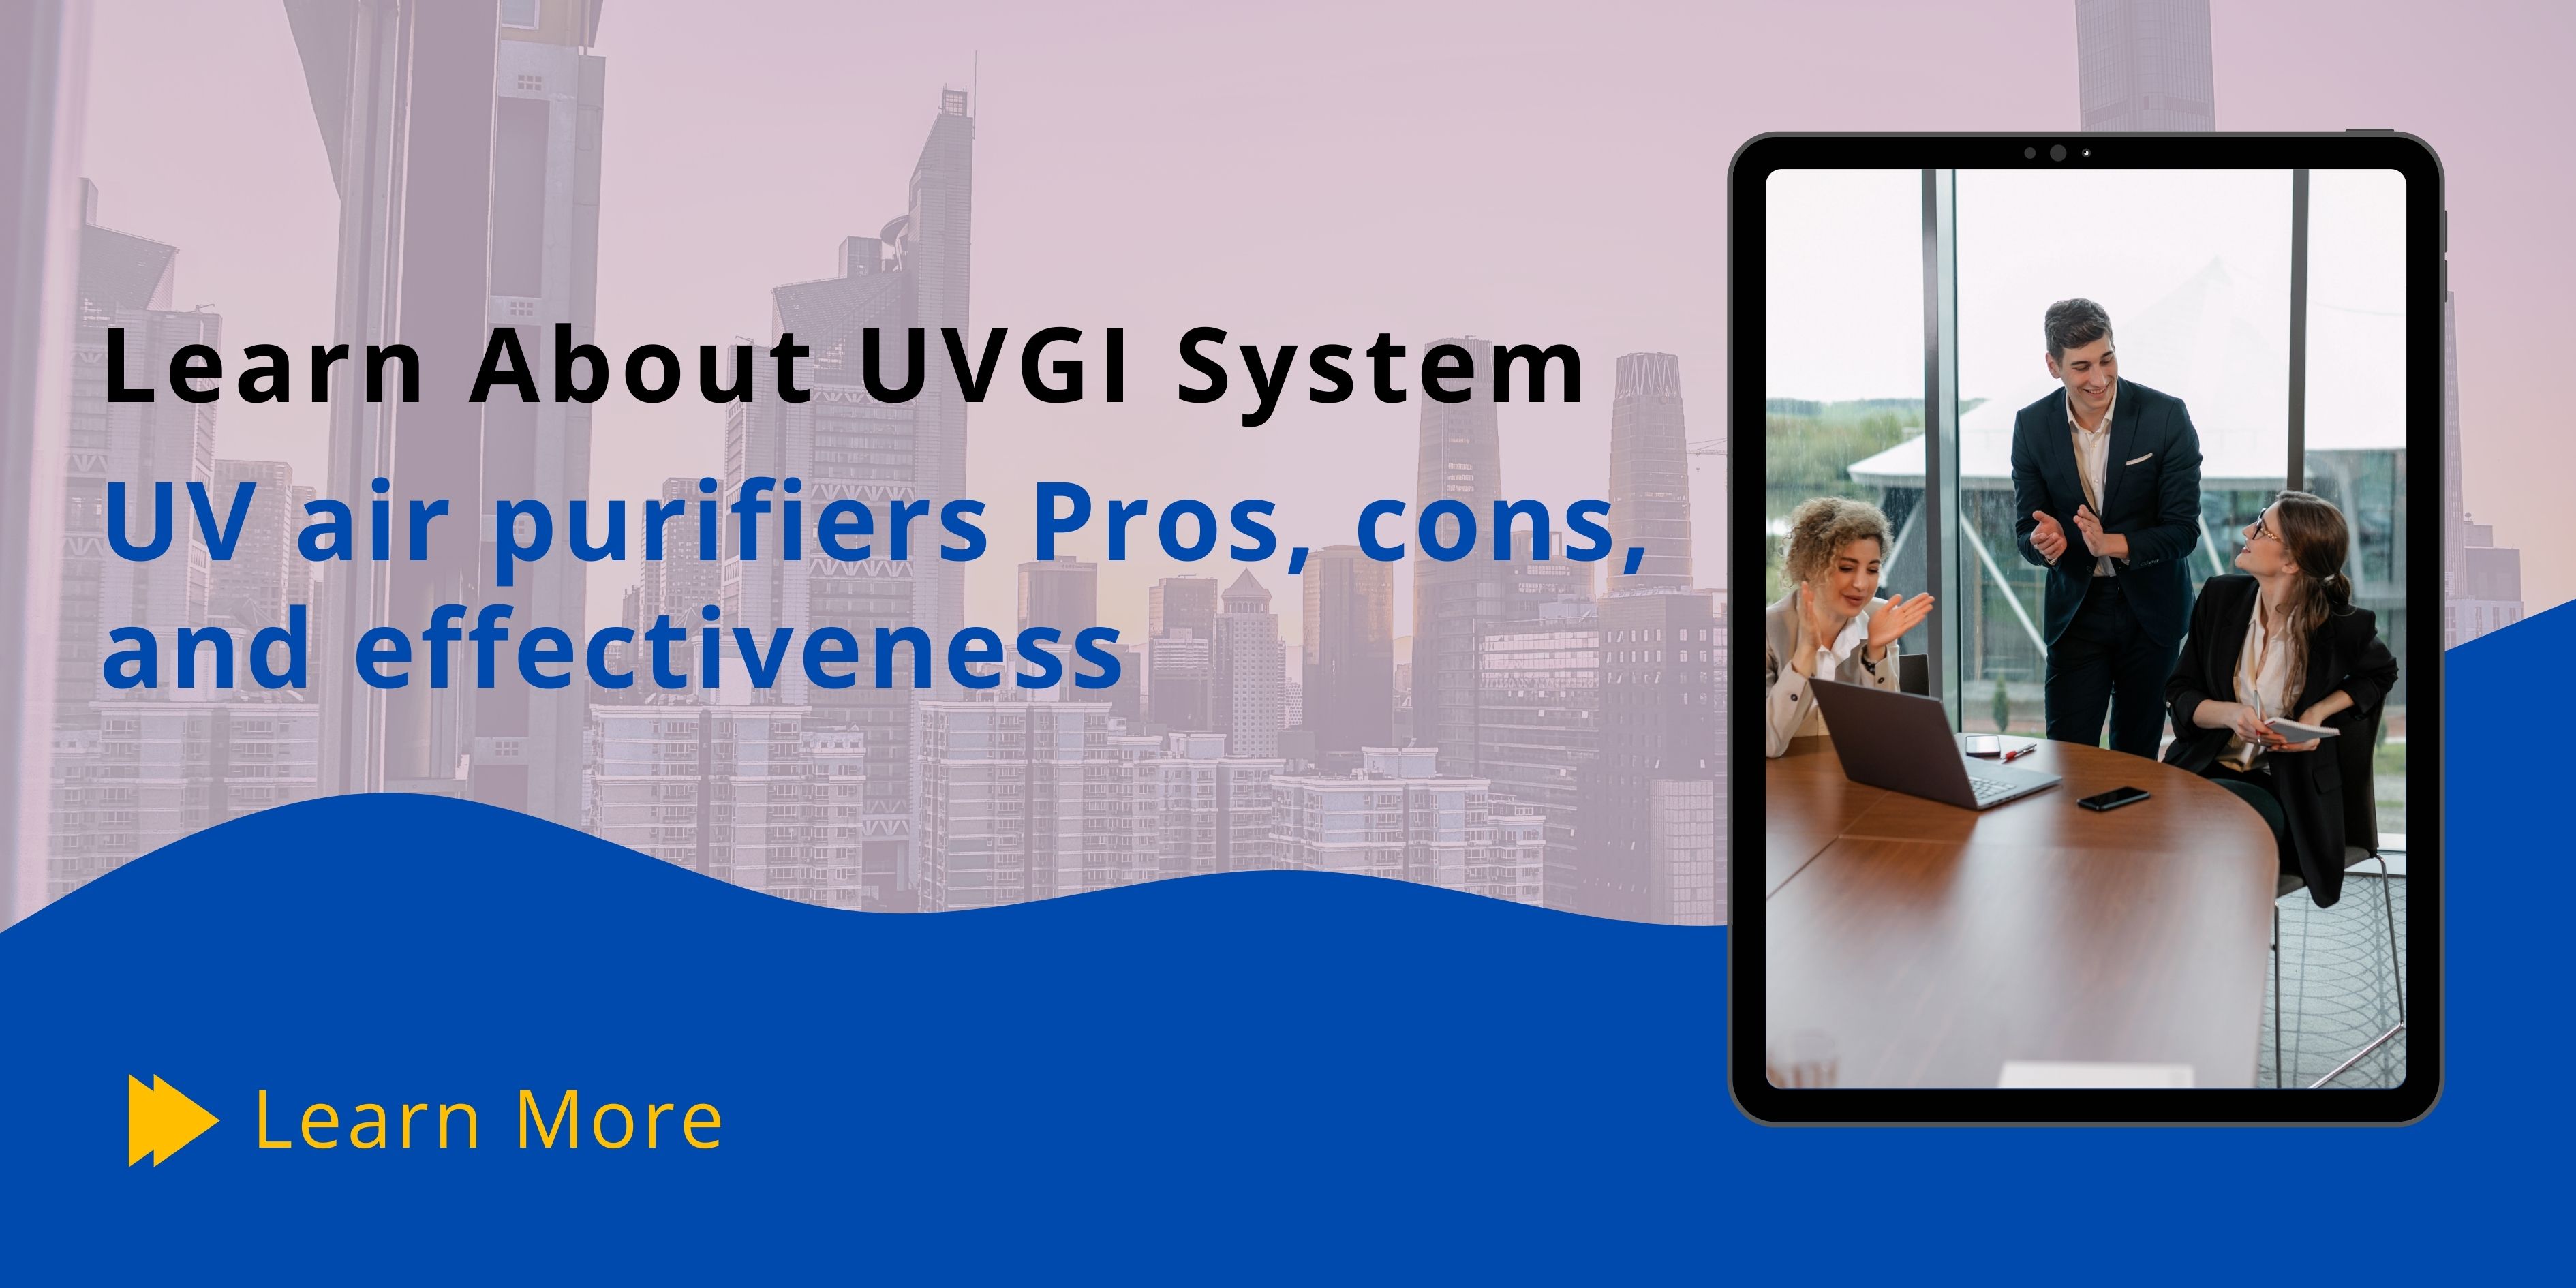 UV Air purifiers Pros, cons, and effectiveness of UVGI System